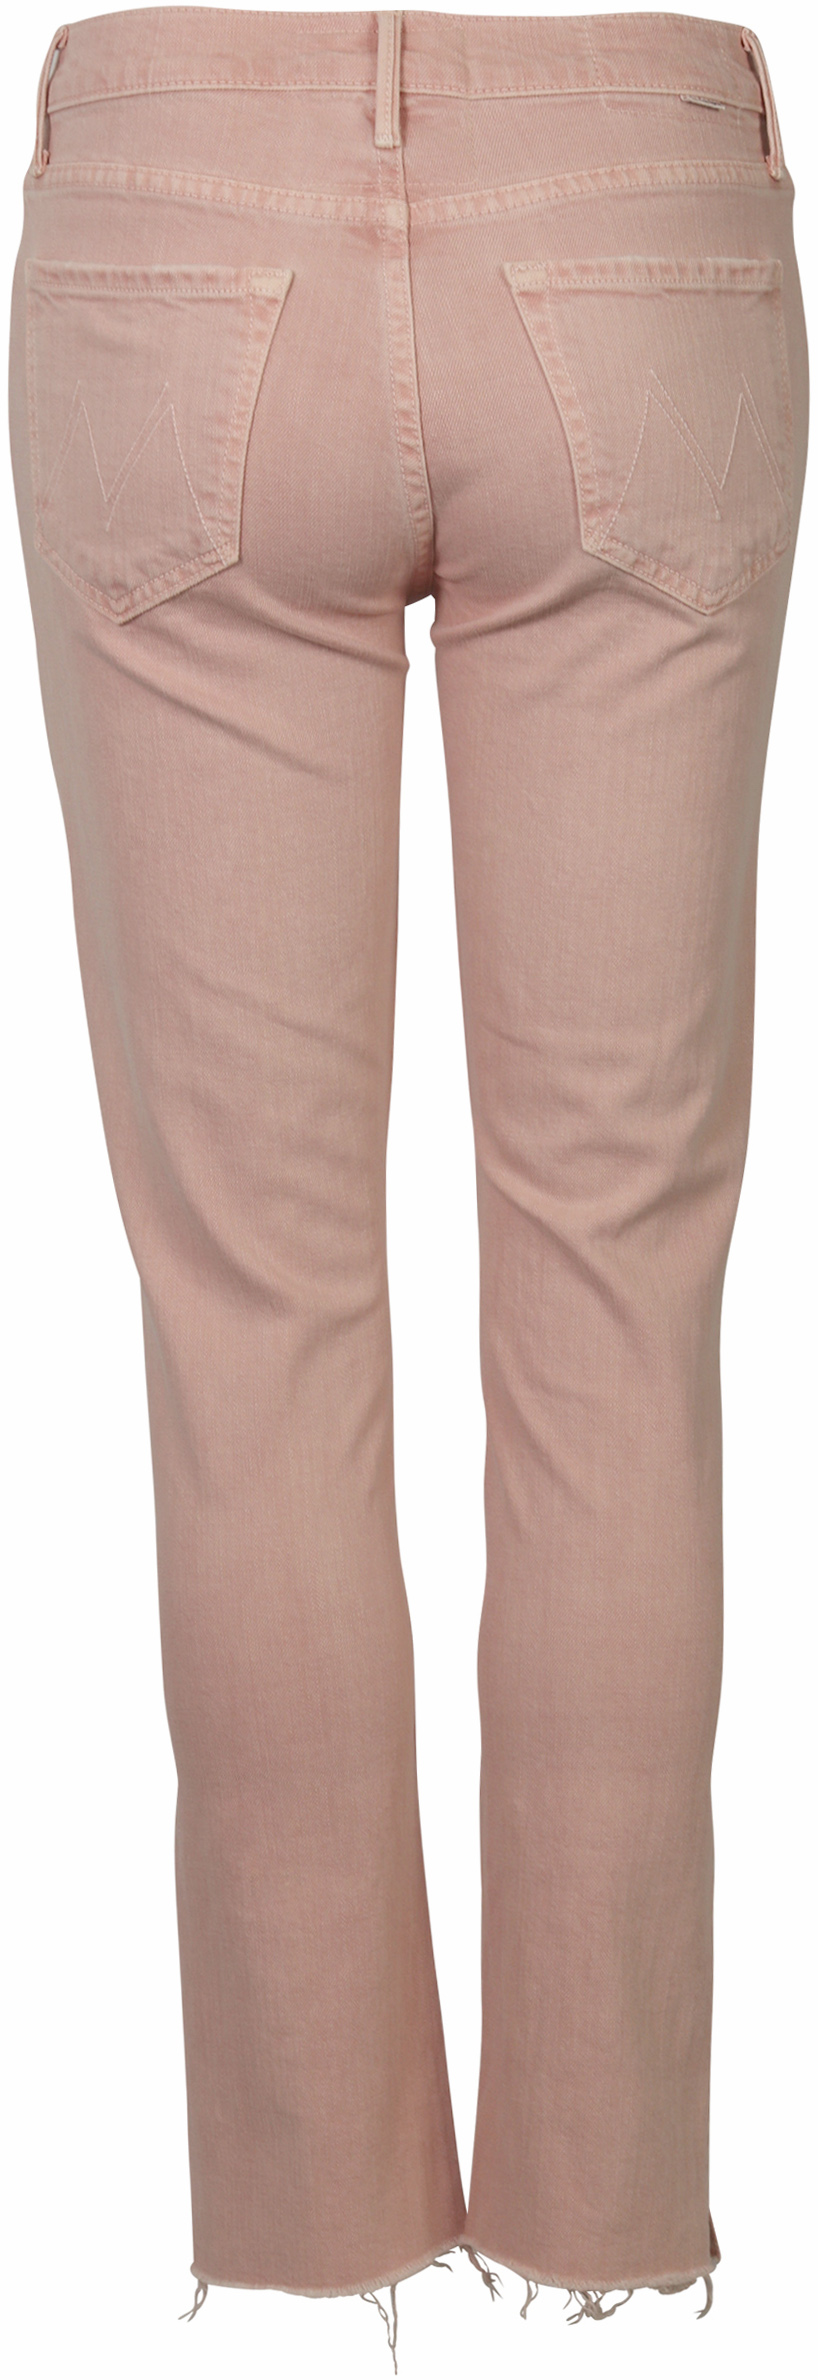 Mother Cropped Jeans Blush Pink